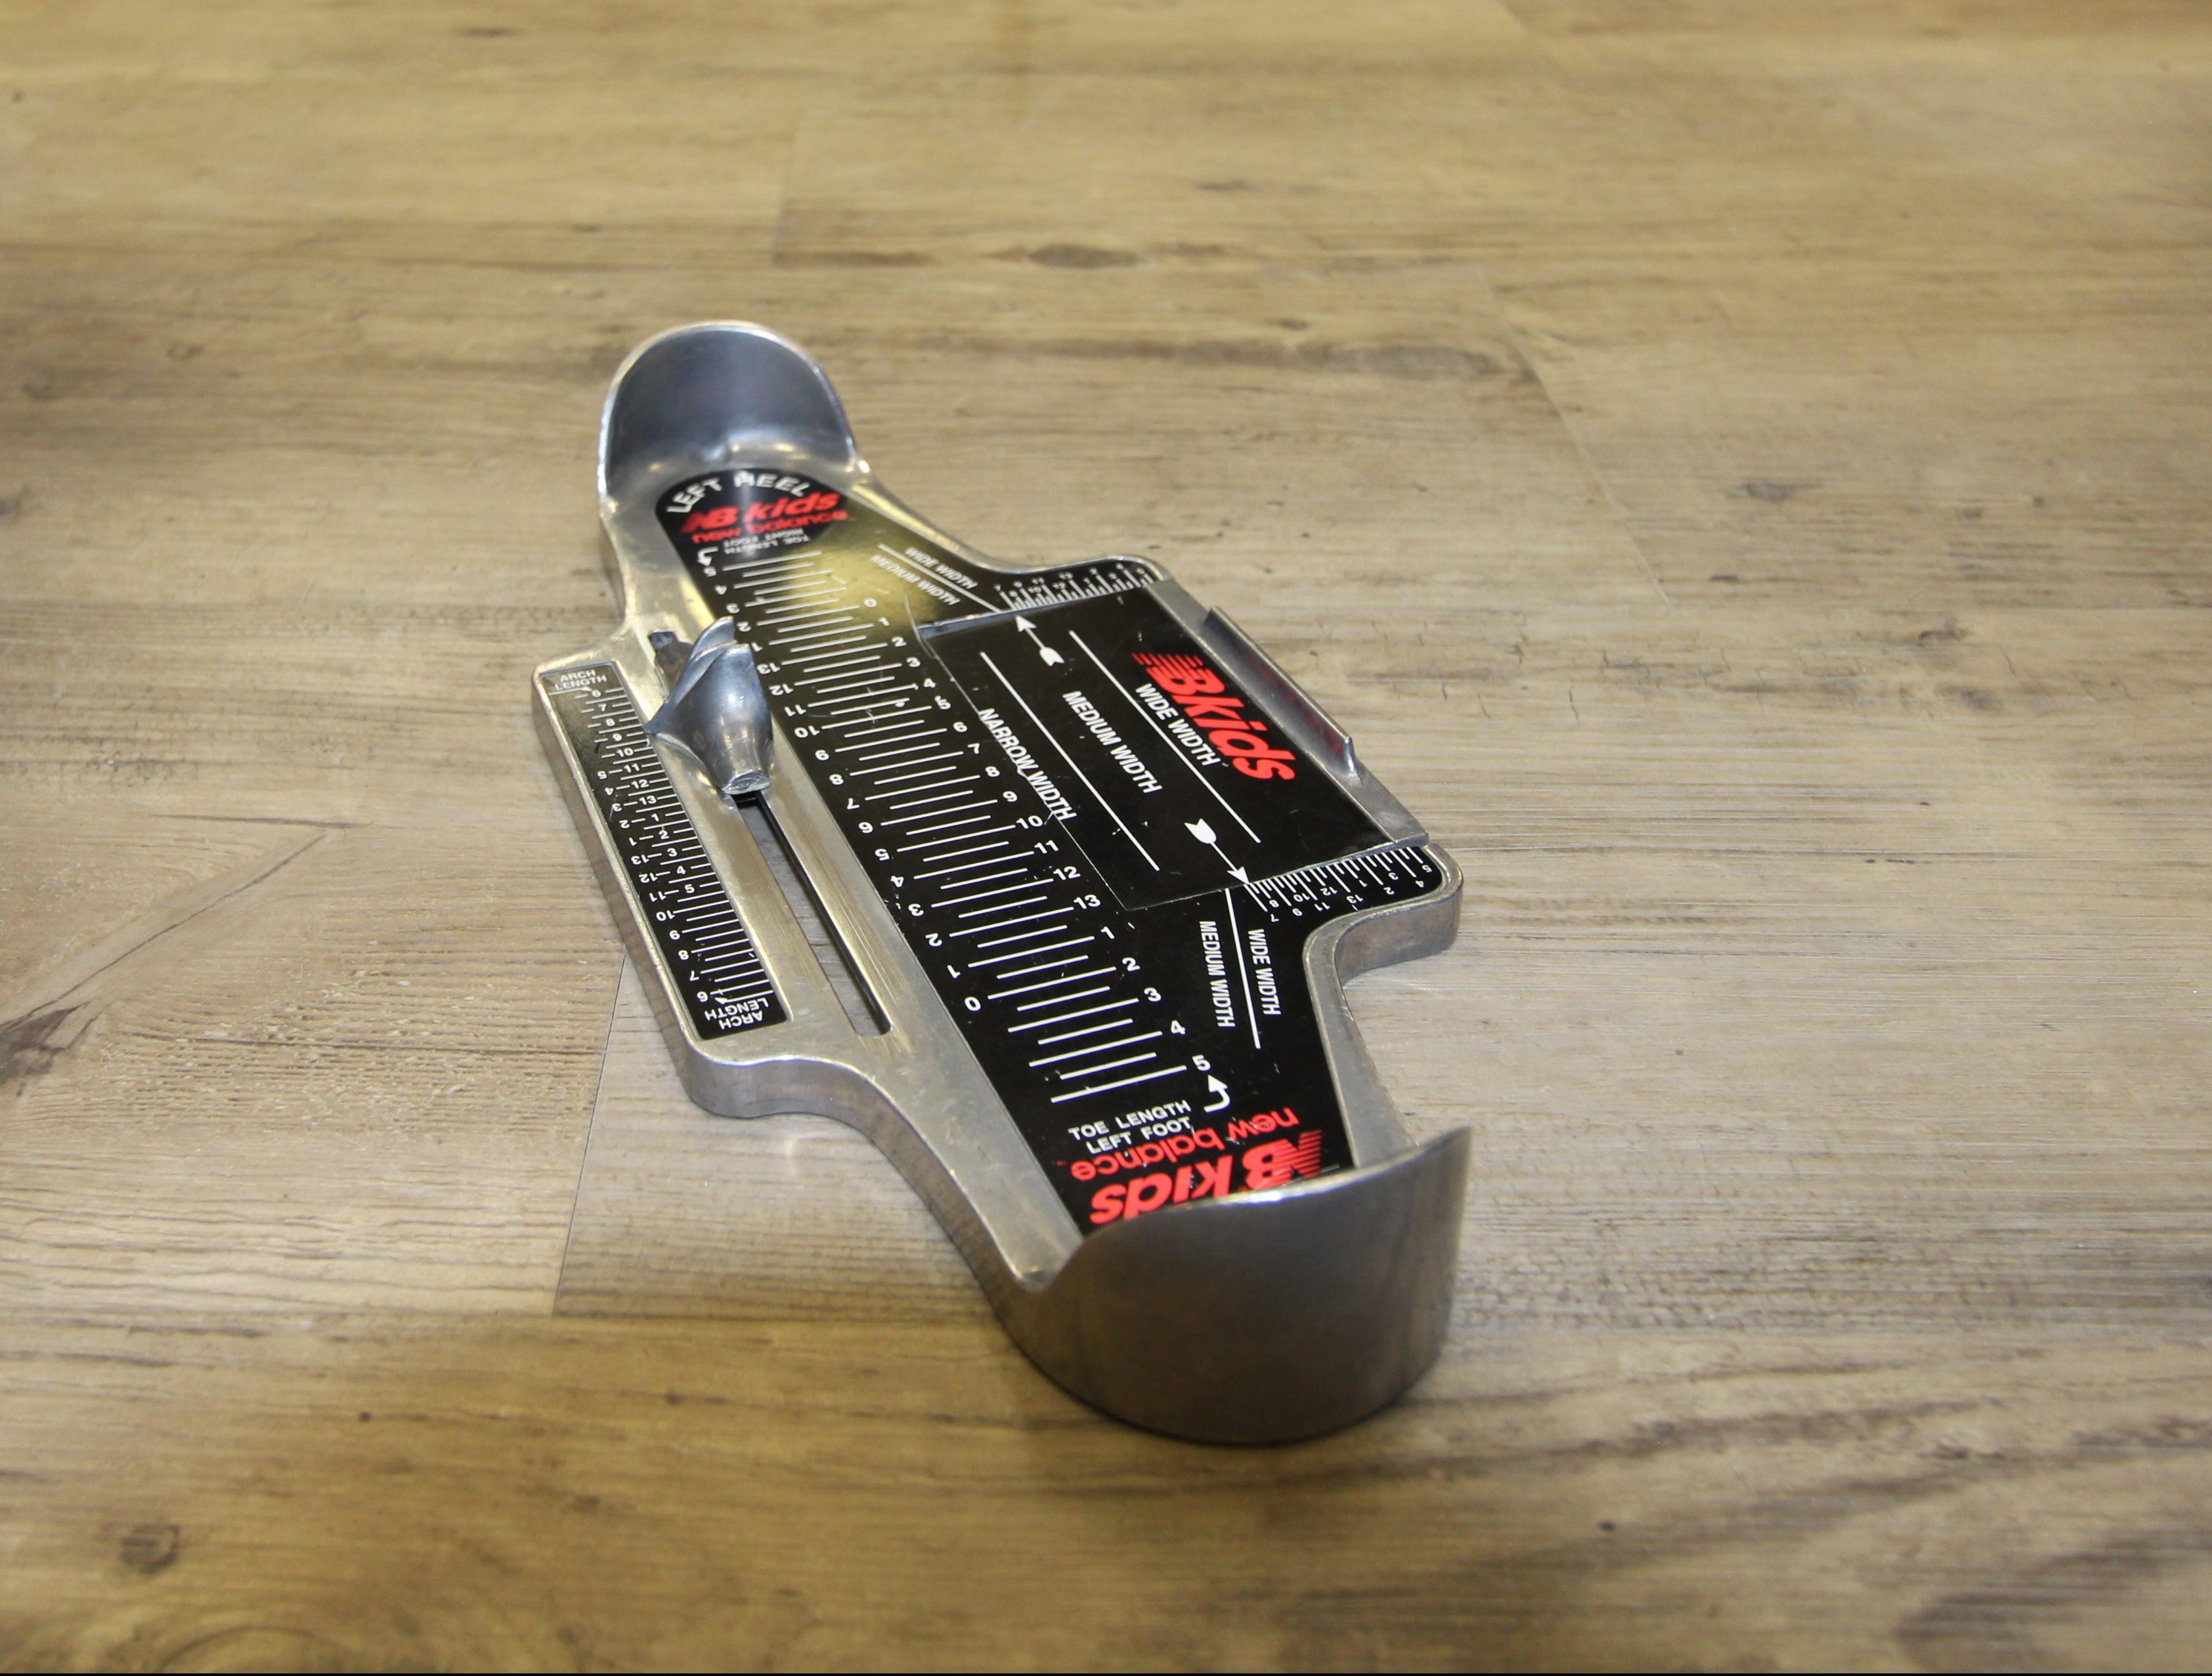 foot measuring device